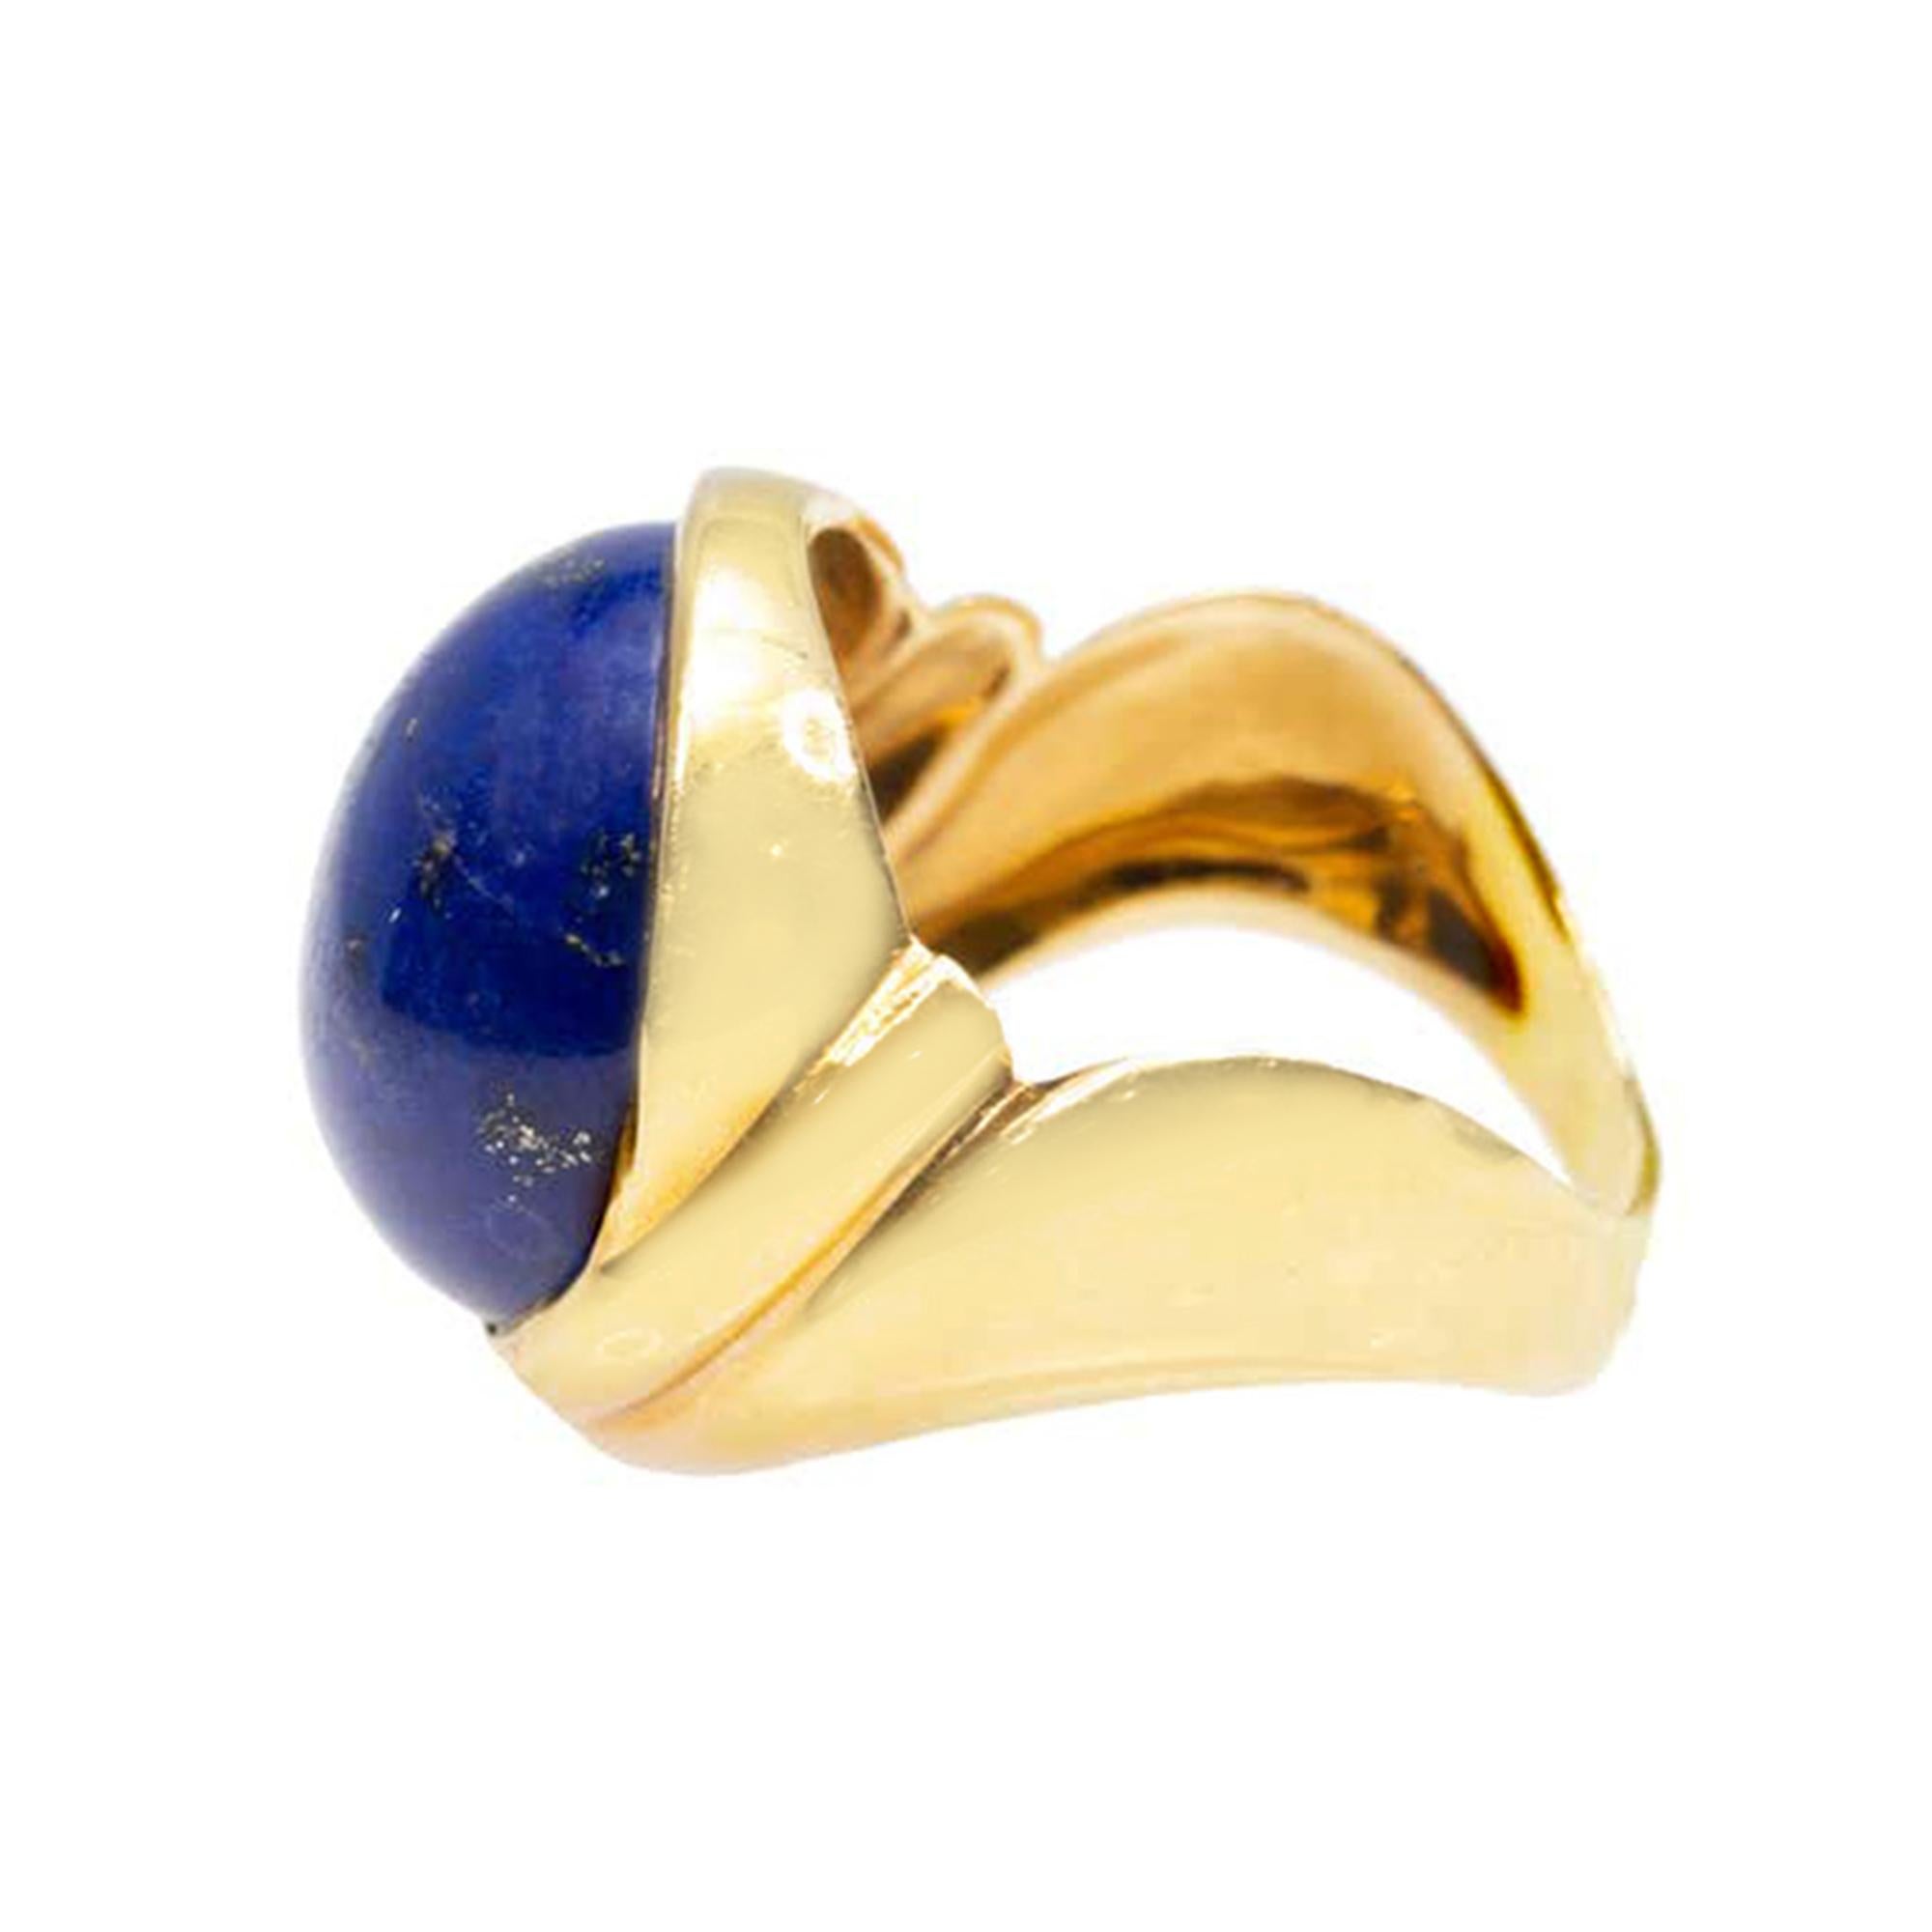 A signed Stefani lapis lazuli cabochon cocktail ring from the 1970s set in 18K yellow gold. Featuring a lapis lazuli cabochon of very good intense blue color, this cocktail ring was created by Stefano Stefani, jeweler of Vicenza, Italy.  The ring